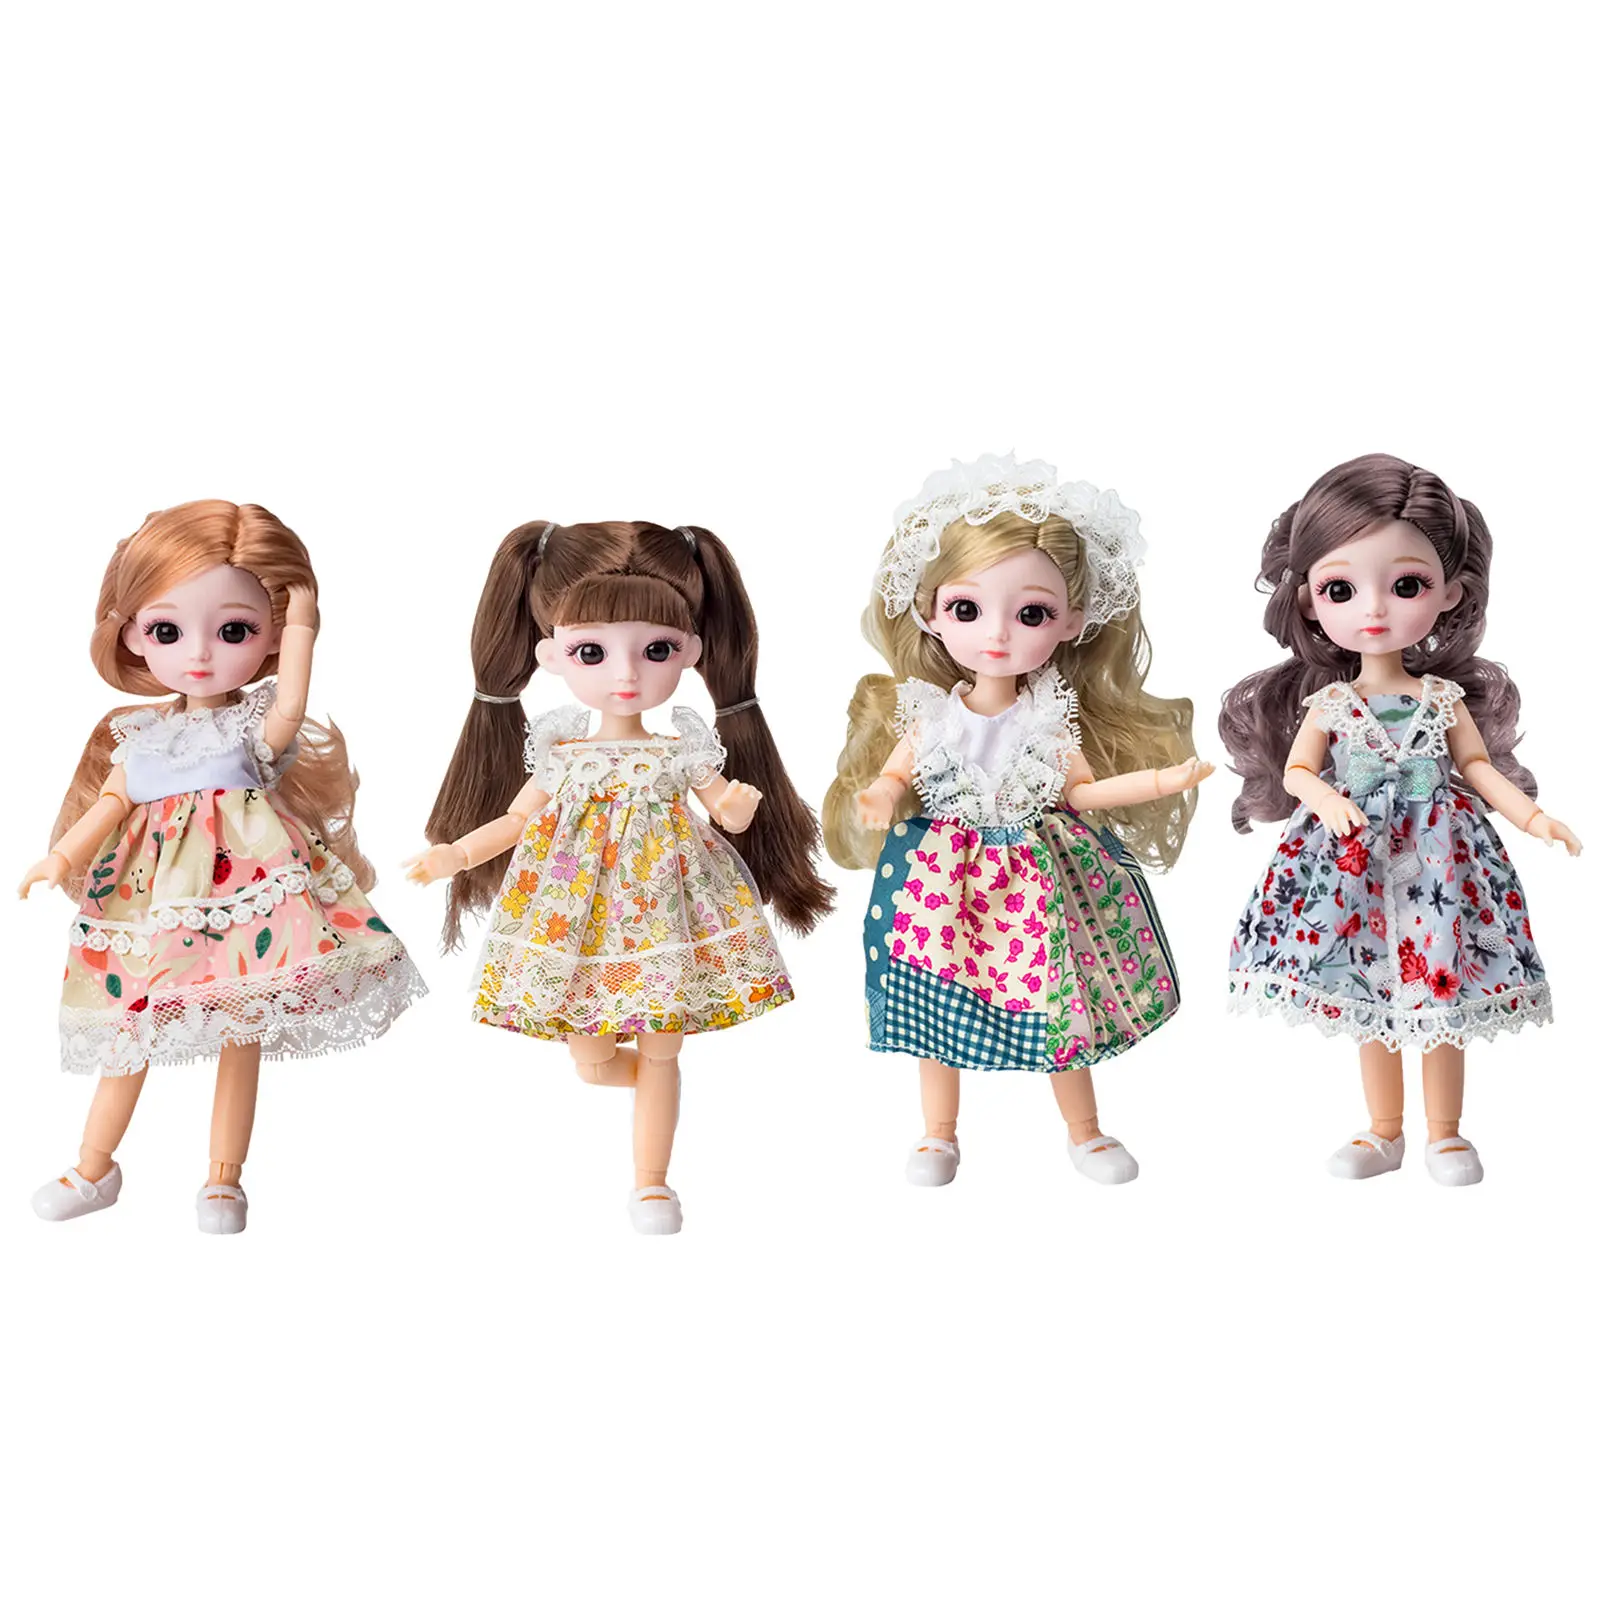 13 Set Moveable Joint Princess Standing Doll, Princess Doll Blue Sleeping Blonde Rapunzel Fashion Doll for Girl House